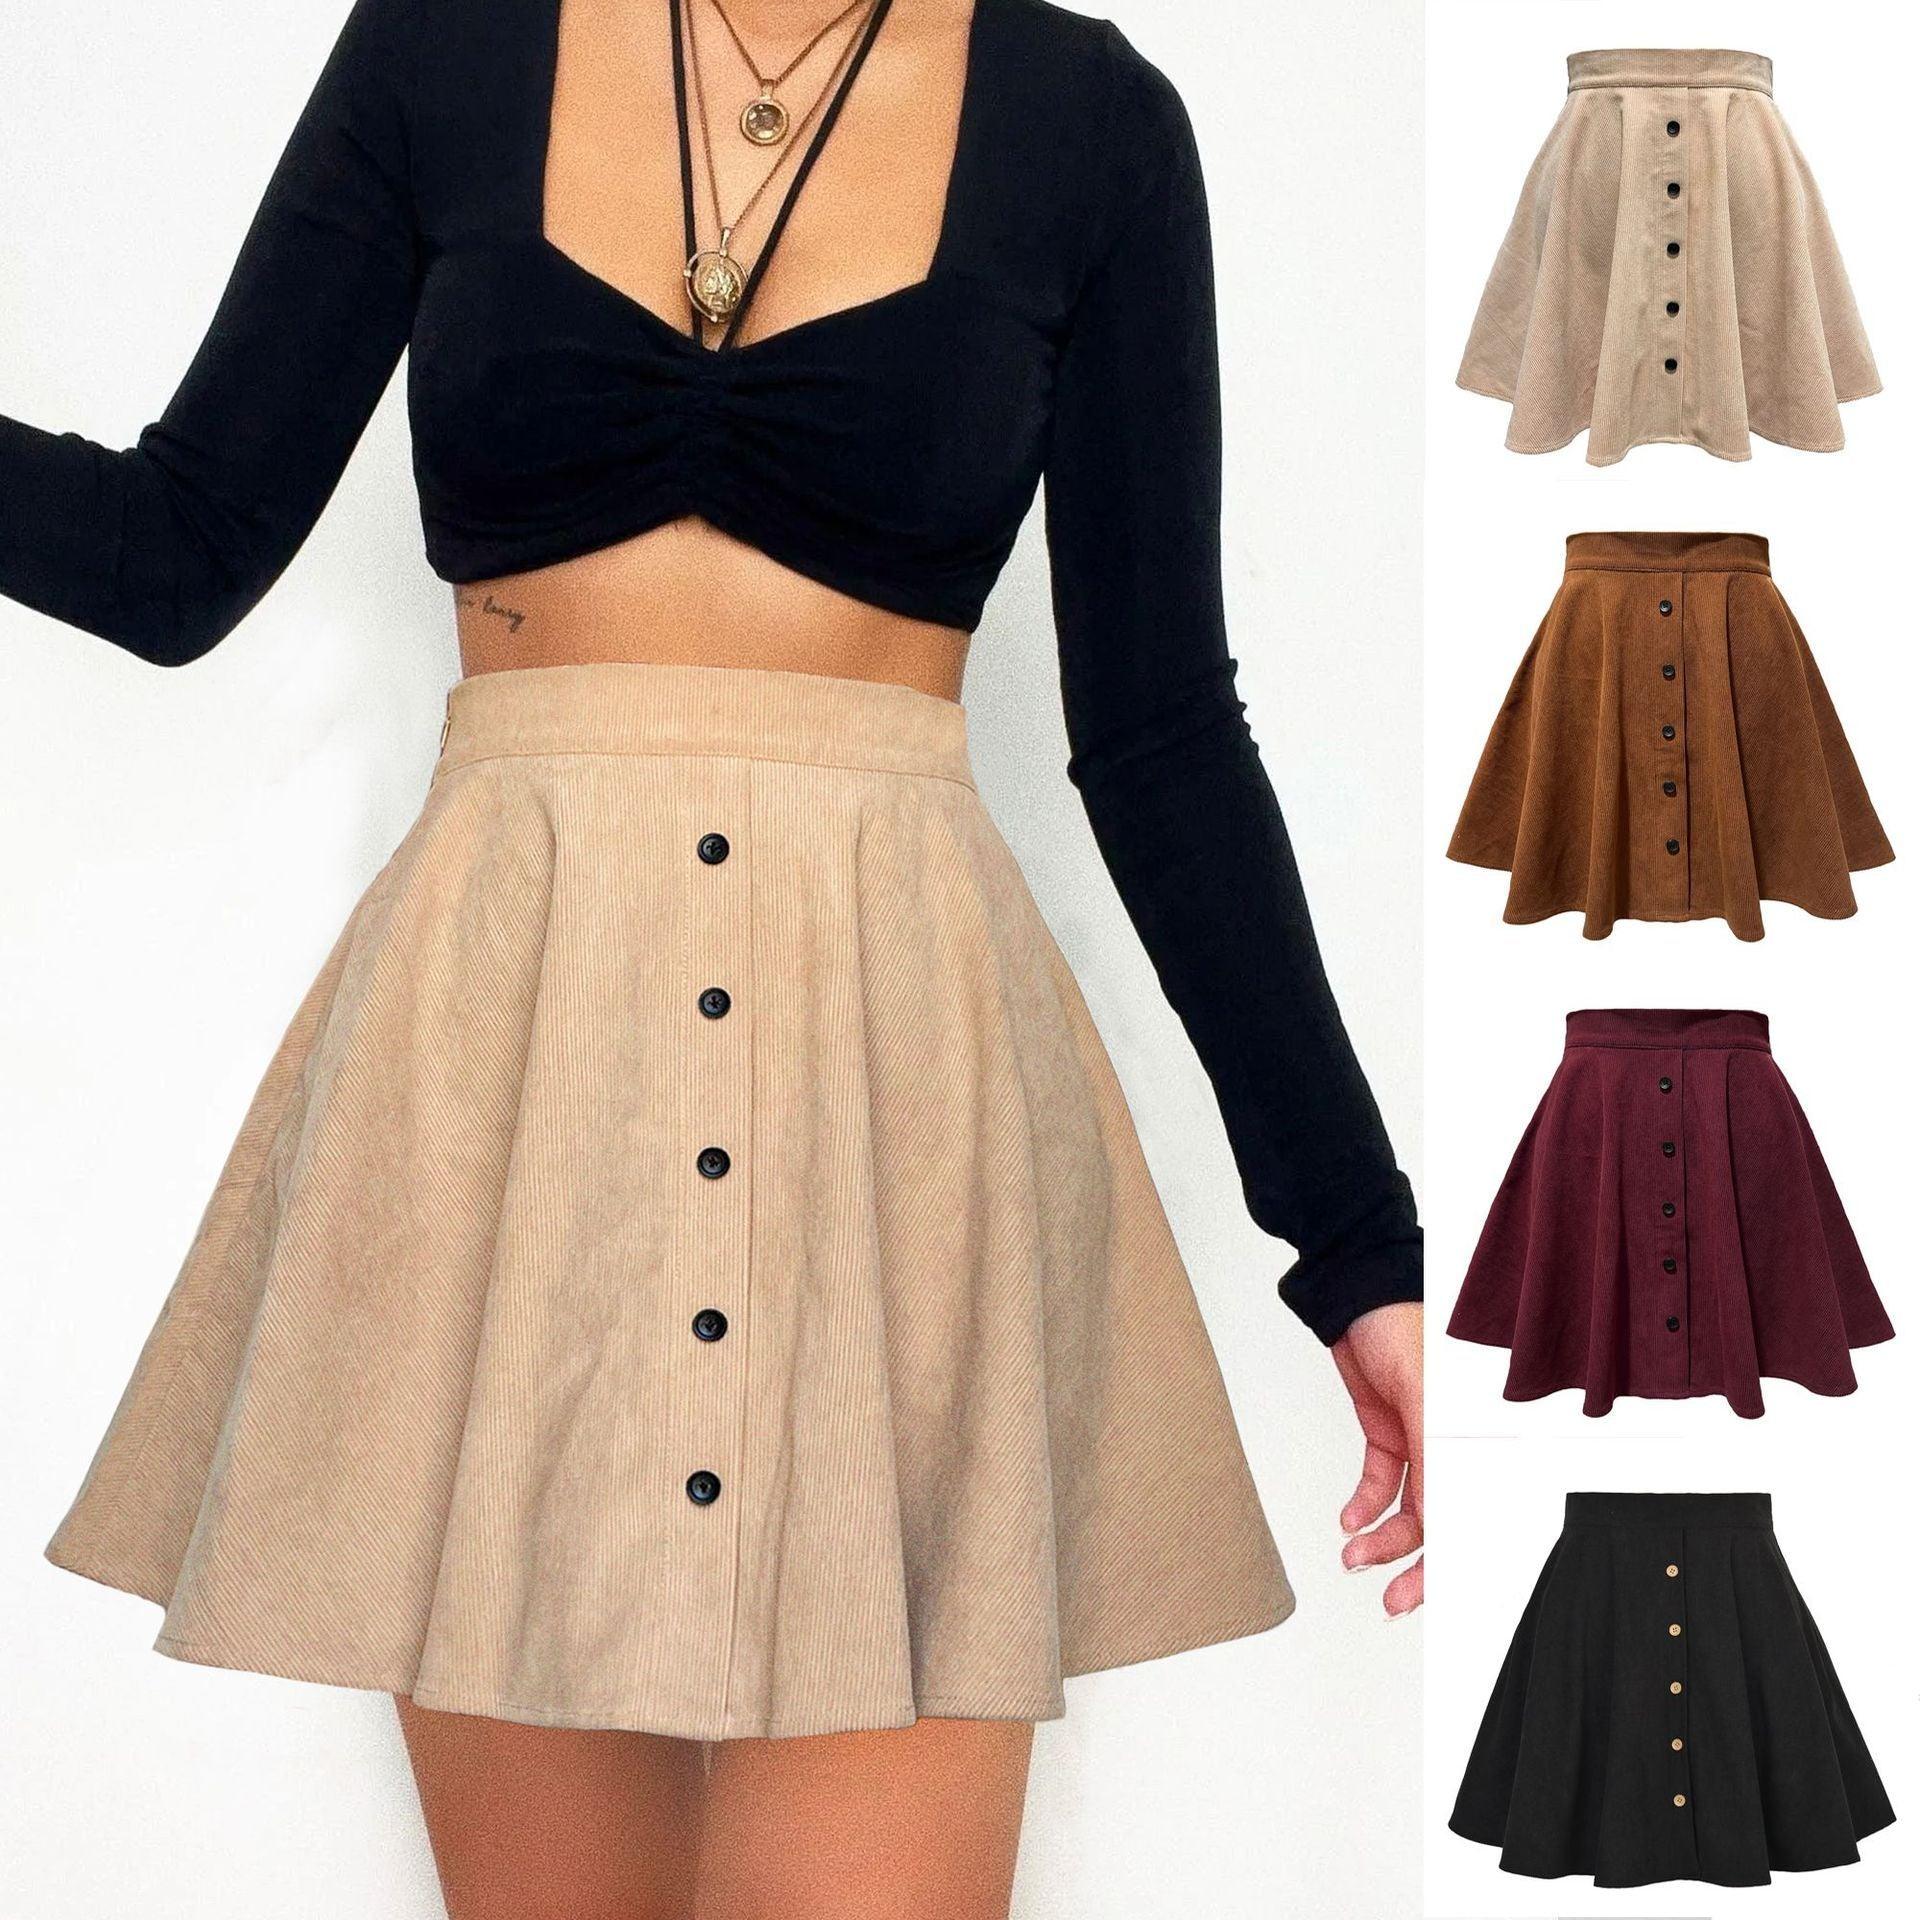 Women's Solid Color Corduroy Skirt – Autumn and Winter Essential with Button Detail - Glinyt